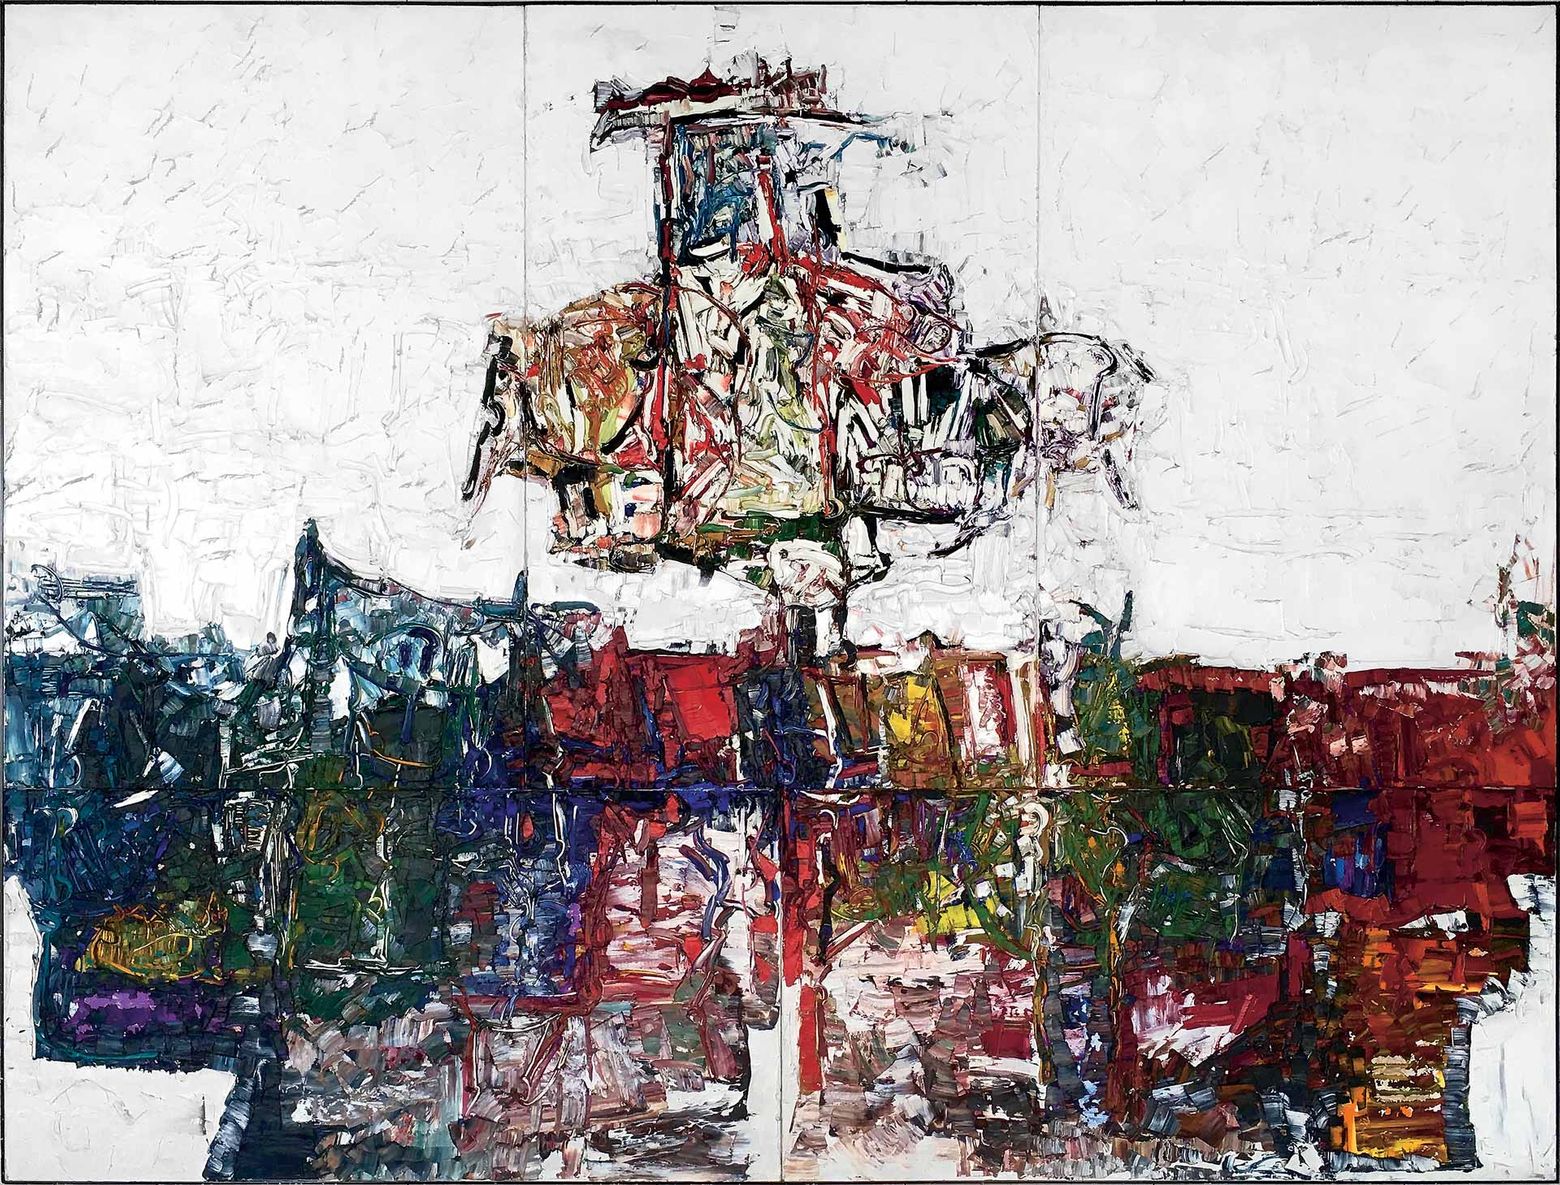 Riopelle, the call of northern landscapes and indigenous cultures